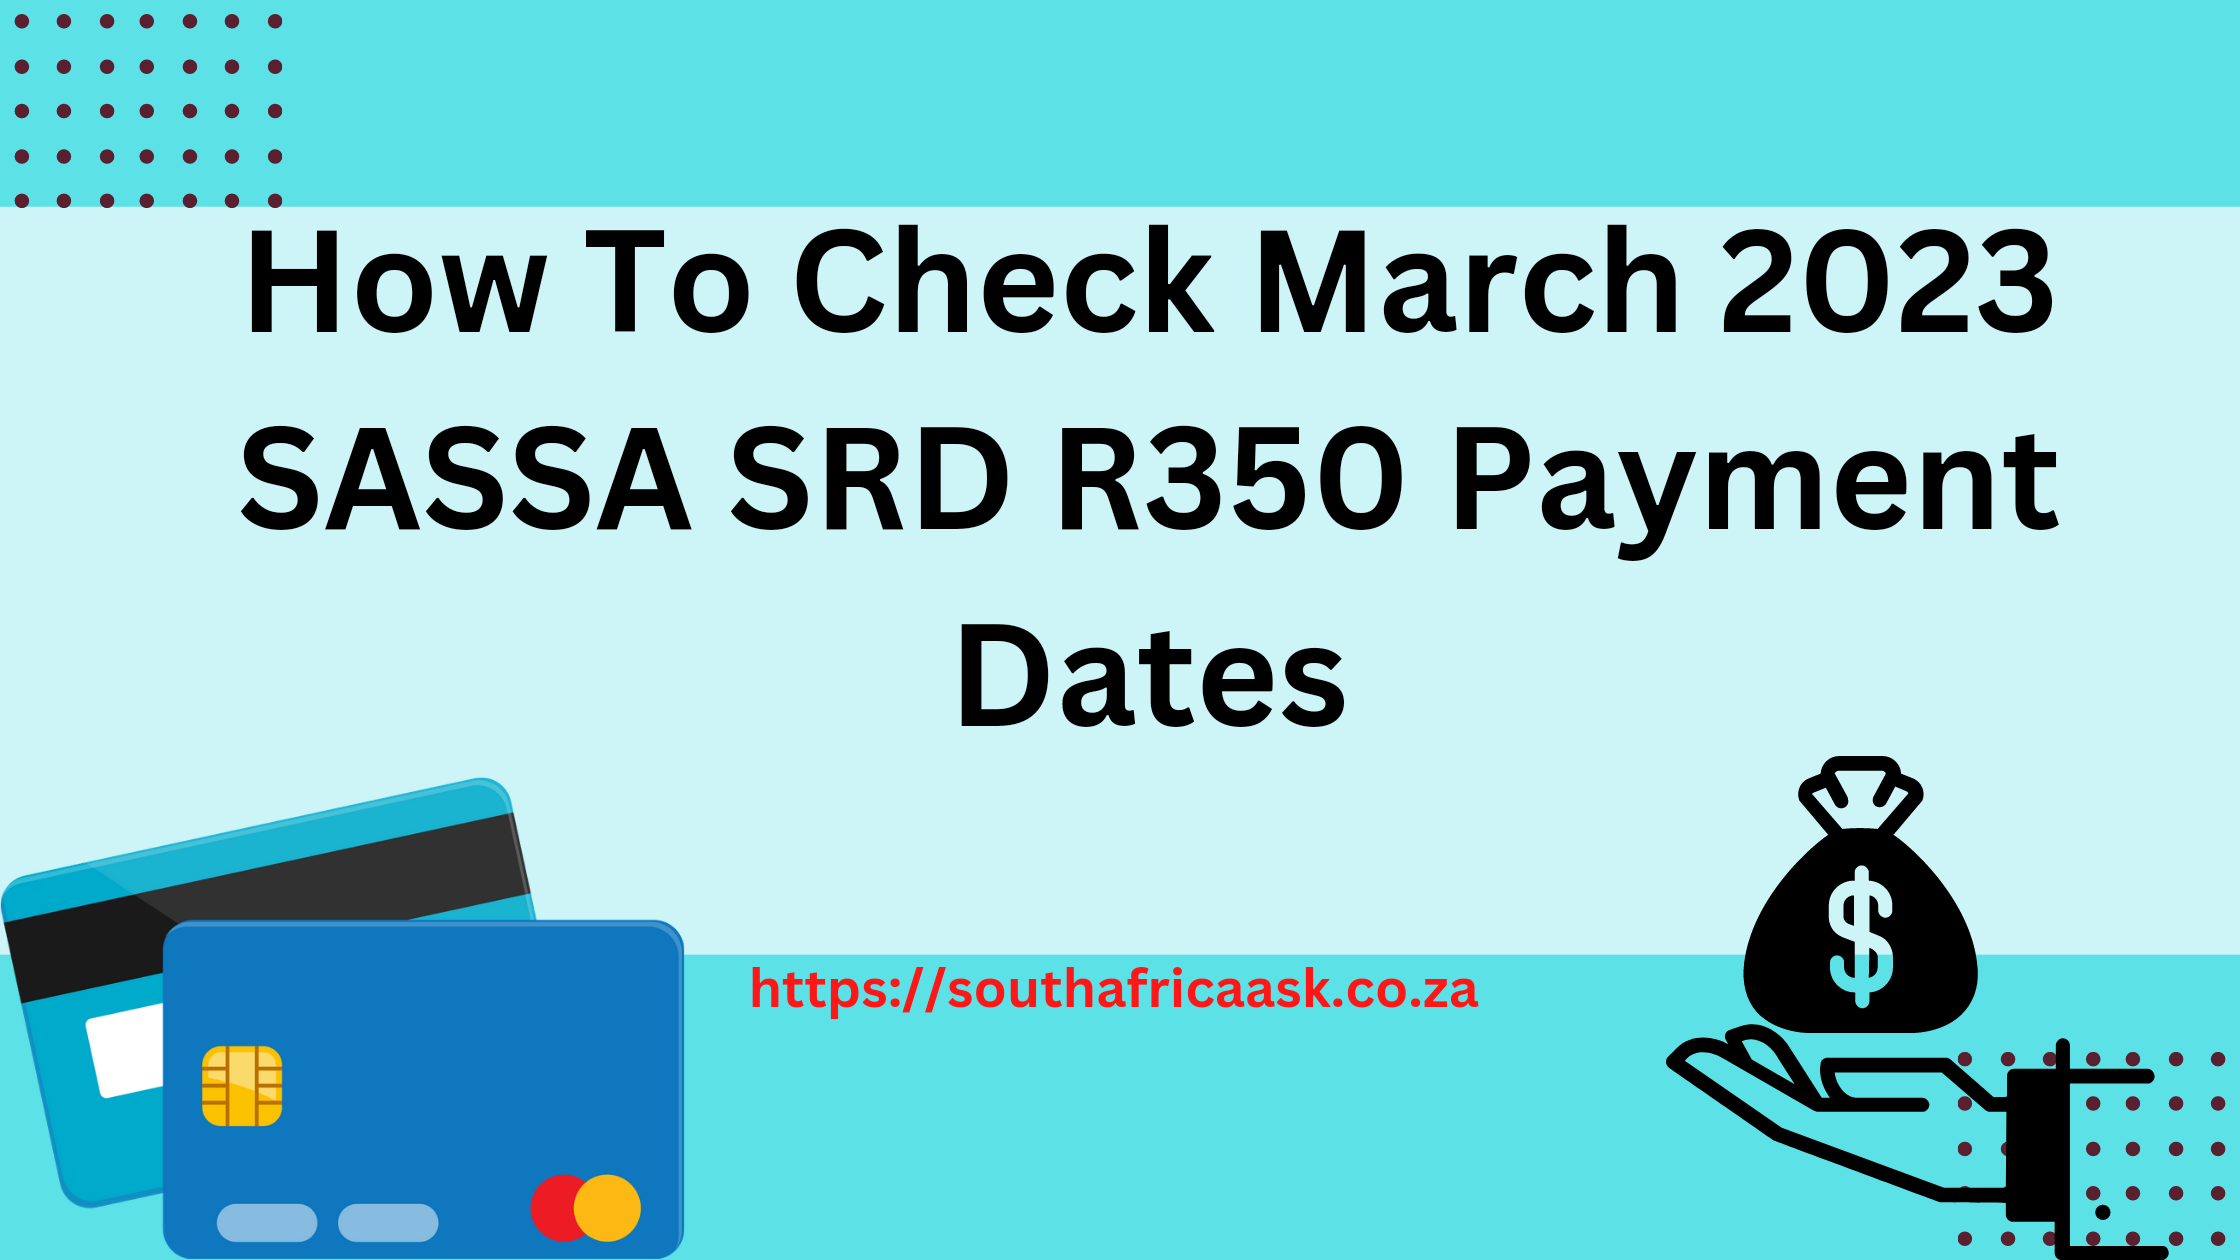 How To Check March 2023 SASSA SRD R350 Payment Dates